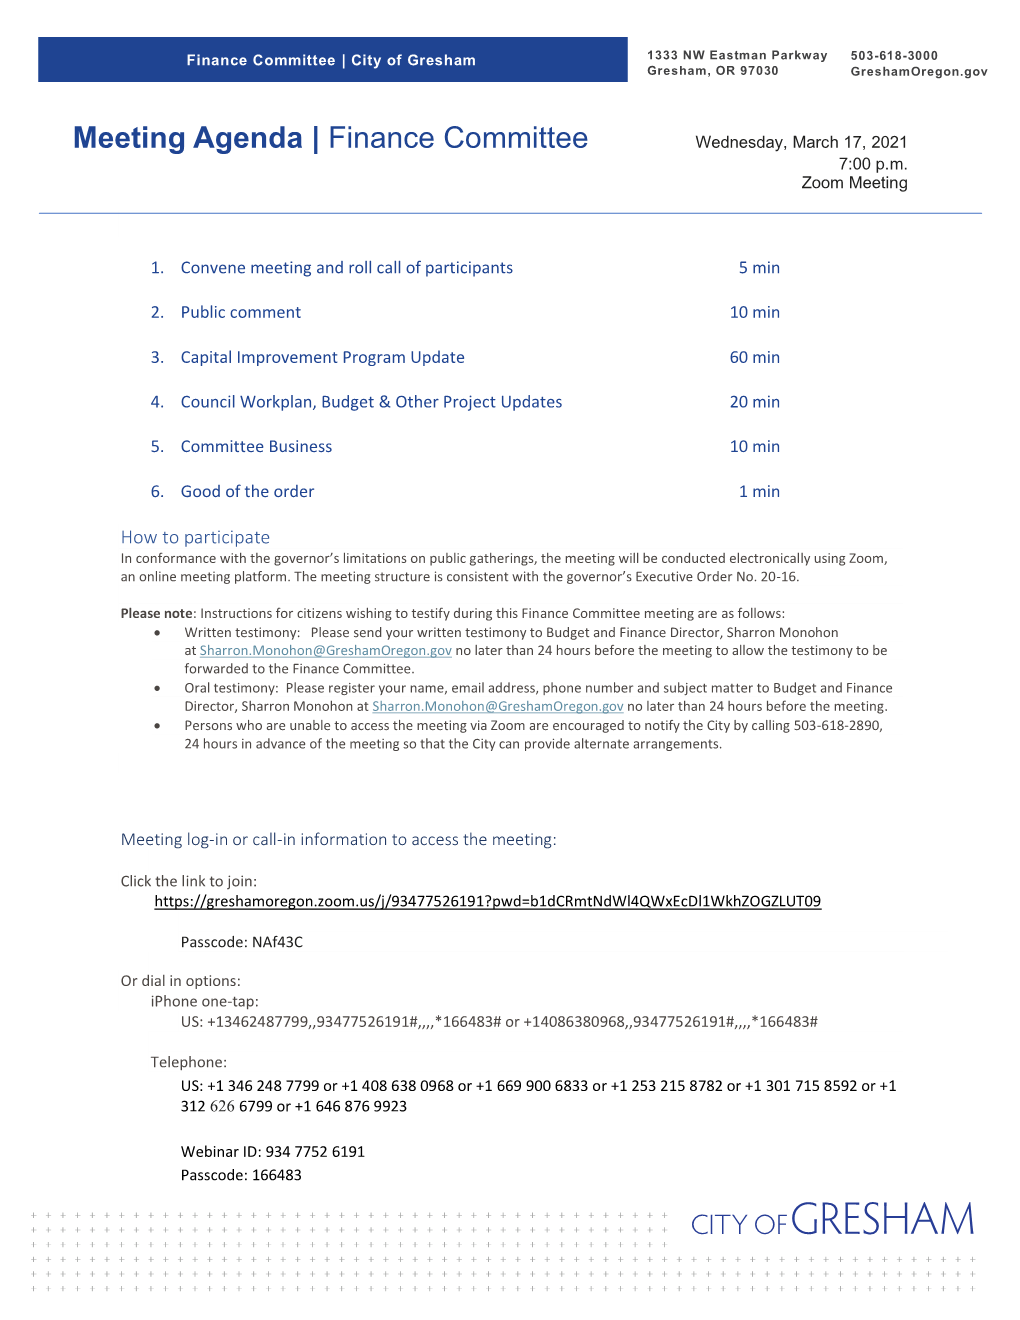 Finance Committee Meeting Agenda March 17, 2021